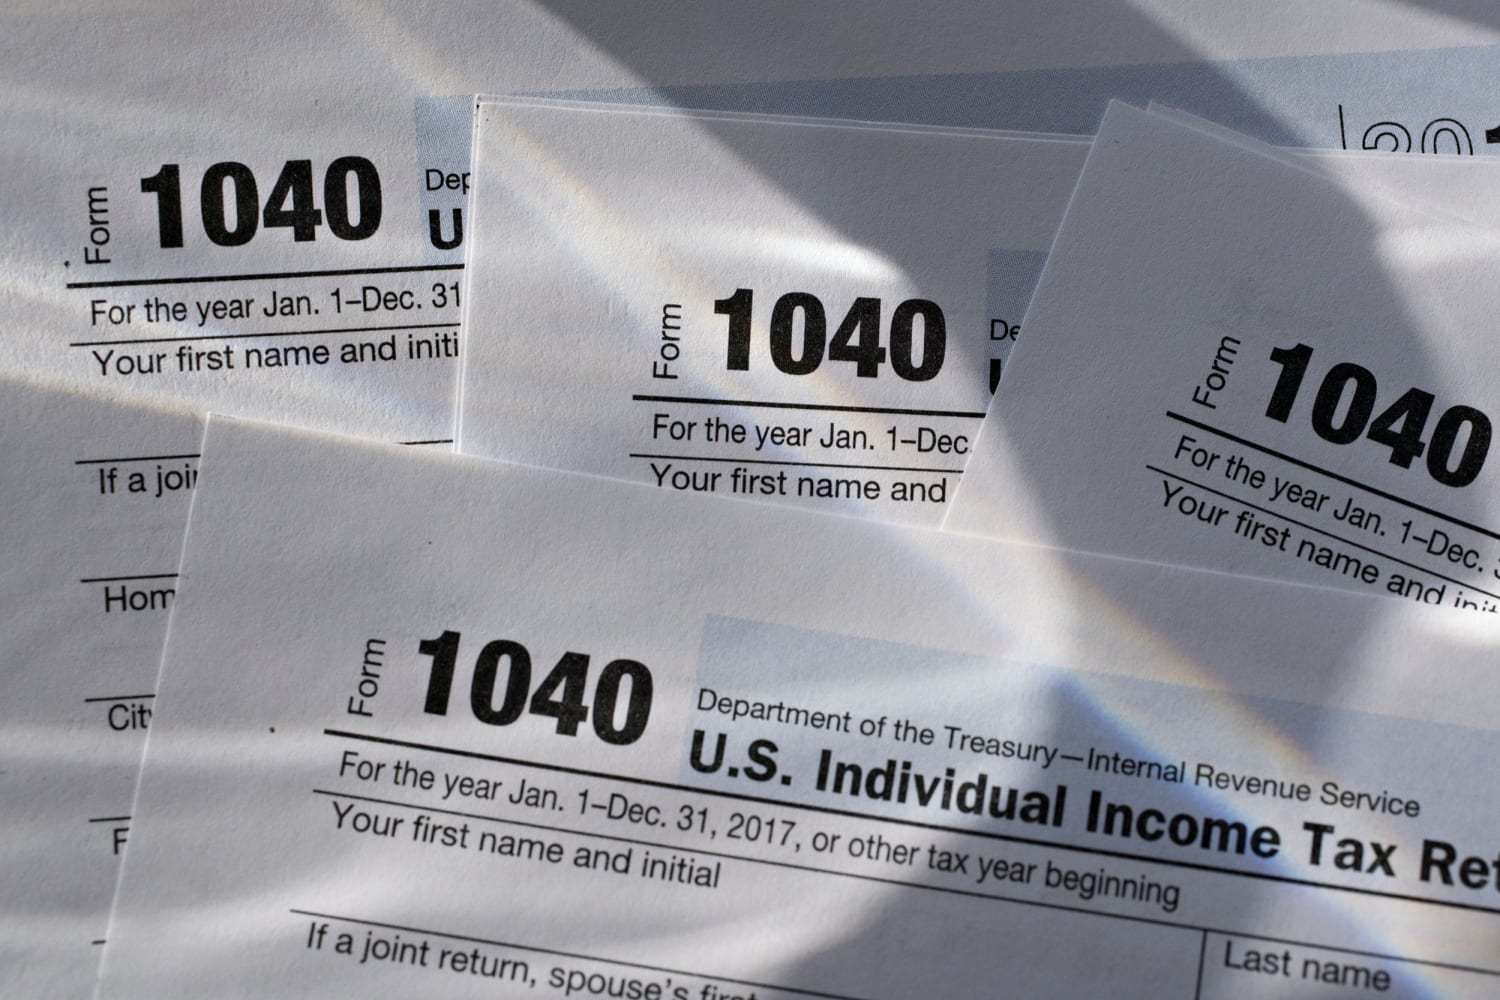 America’s tax brackets are changing thanks to inflation. Here’s how that affects you.